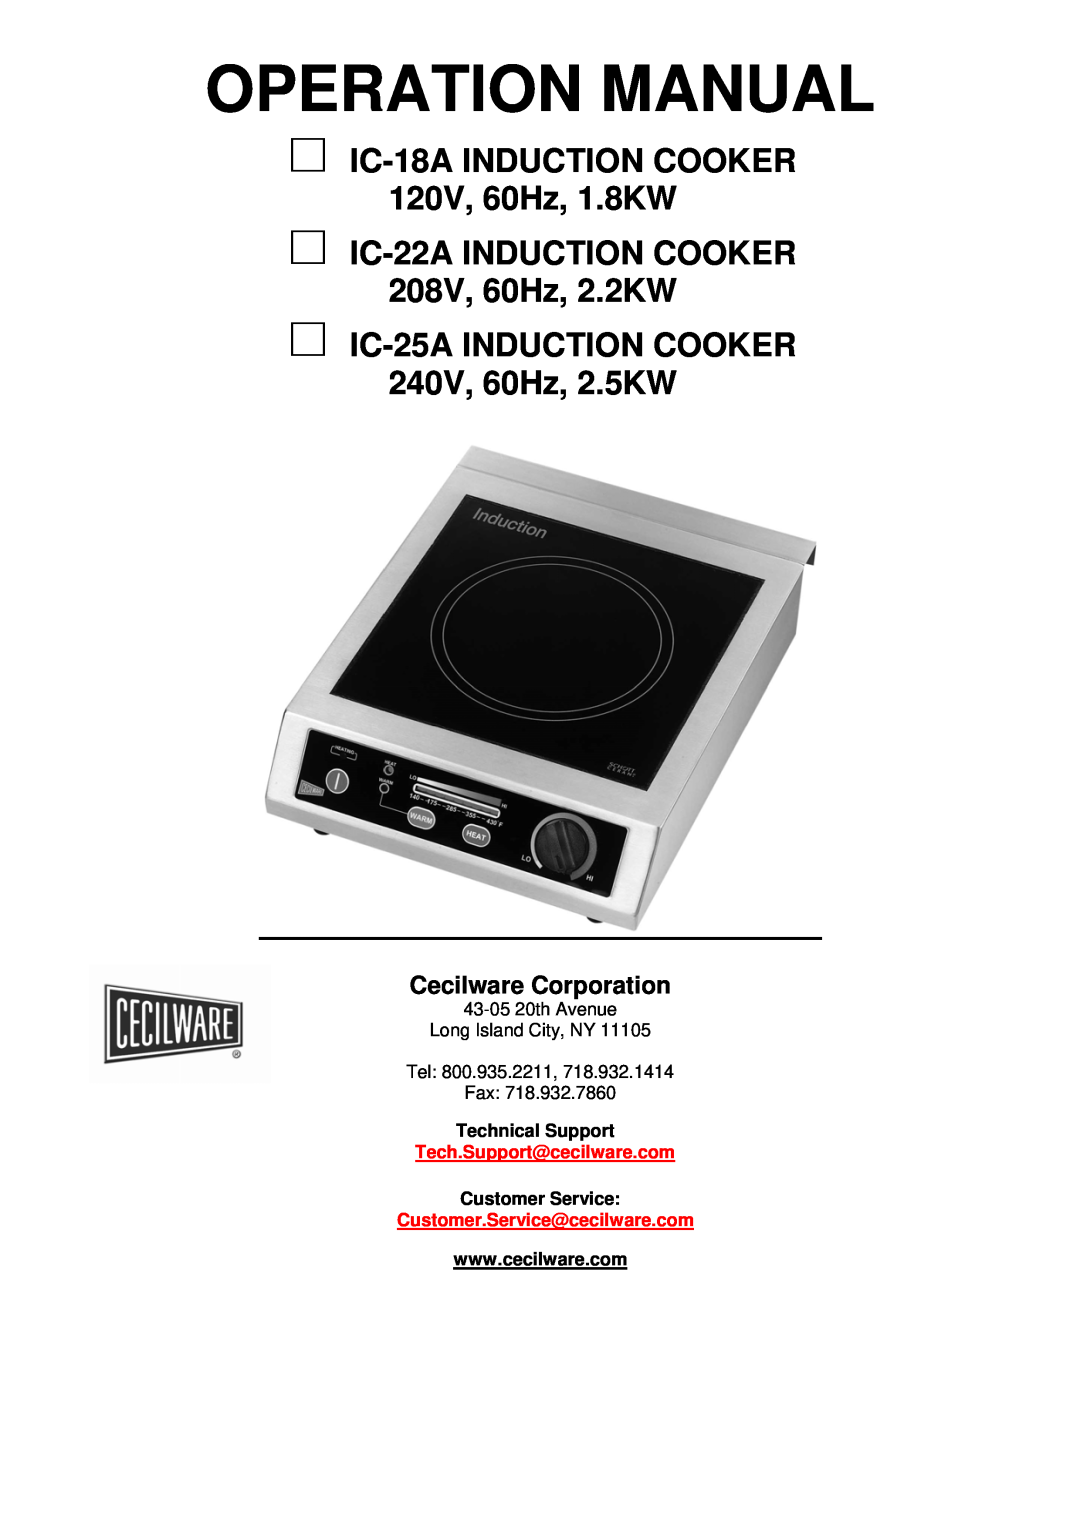 Cecilware IC-22A operation manual Operation Manual, IC-18AINDUCTION COOKER 120V, 60Hz, 1.8KW, Cecilware Corporation 